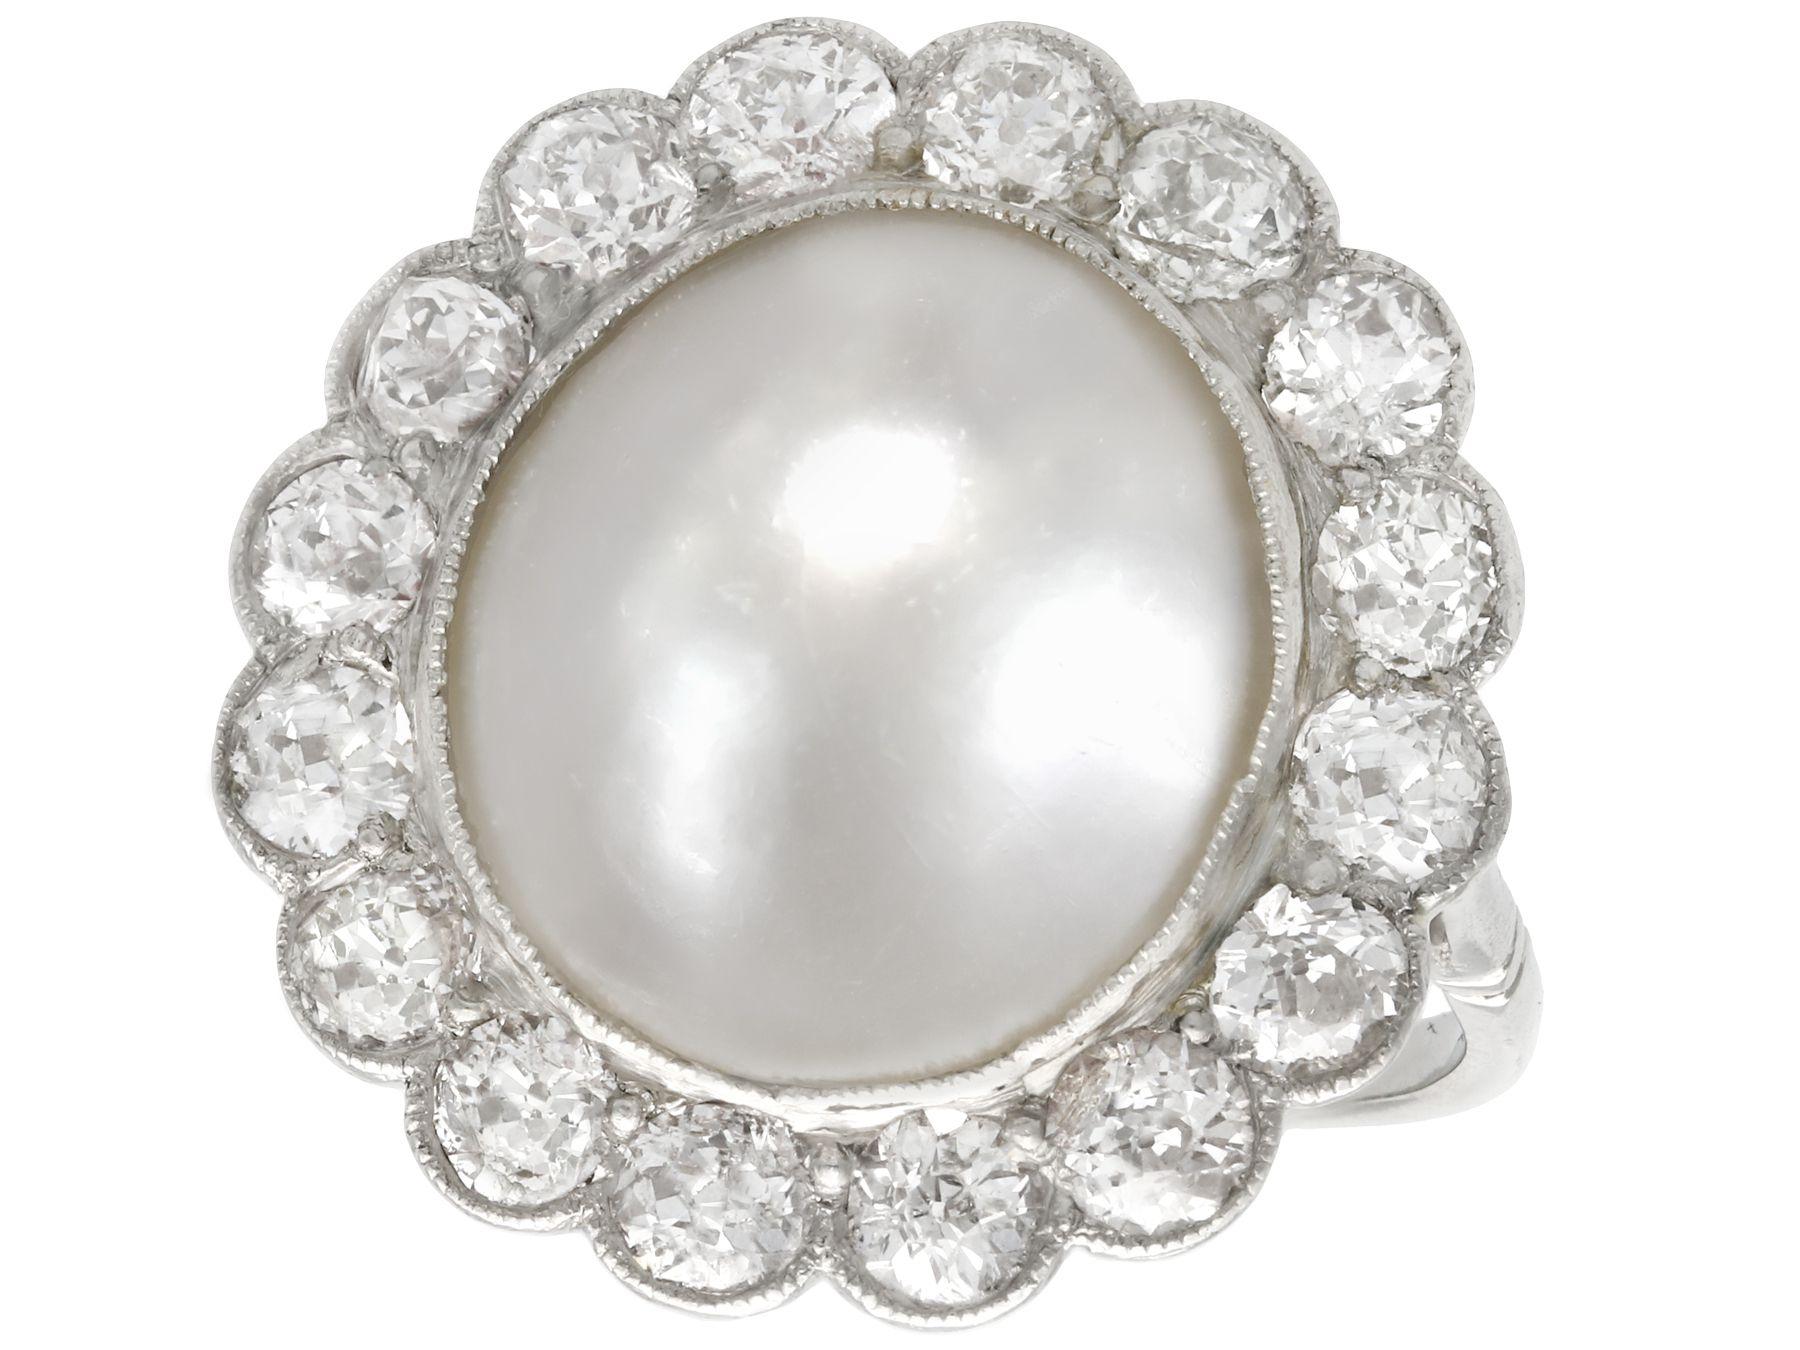 A stunning antique 1930s mabe pearl and 1.90 carat diamond, platinum cluster style dress ring; part of our diverse antique jewelry and estate jewelry collections.

This stunning, fine and impressive mabe pearl ring with diamonds has been crafted in